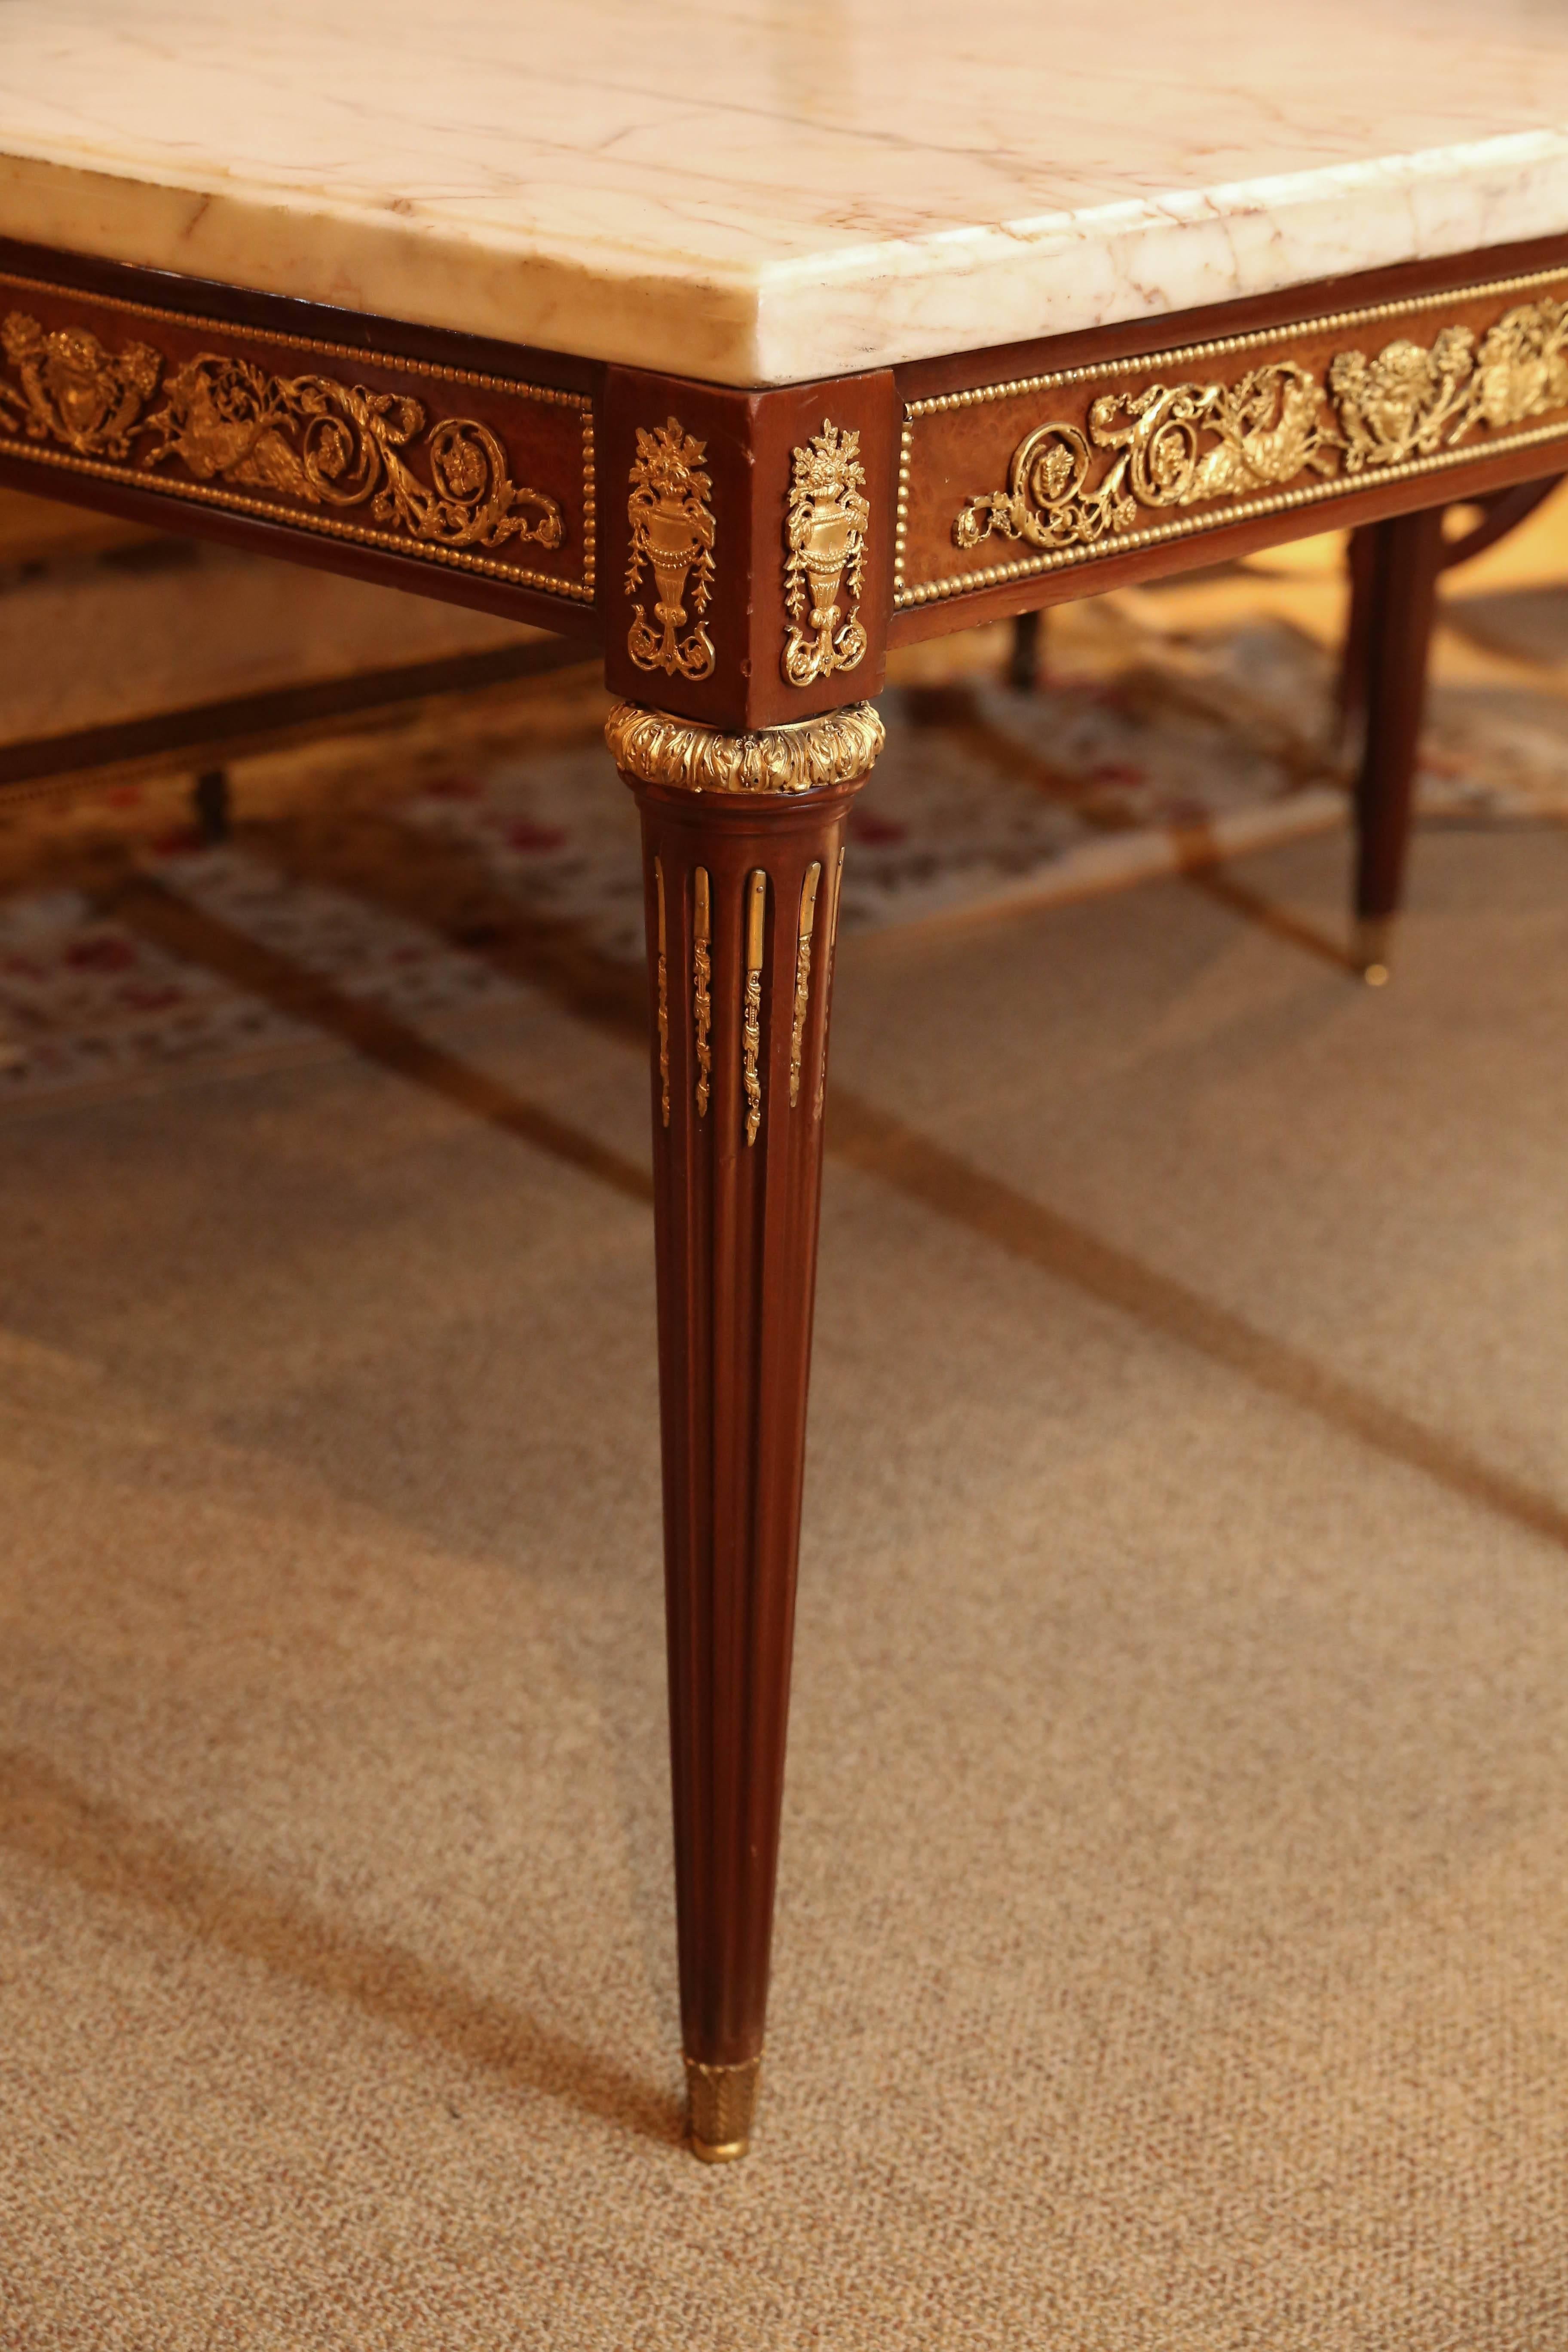 20th Century French Louis XVI Style Salon Table with Gilt Bronze Ormolu and Marble Top For Sale